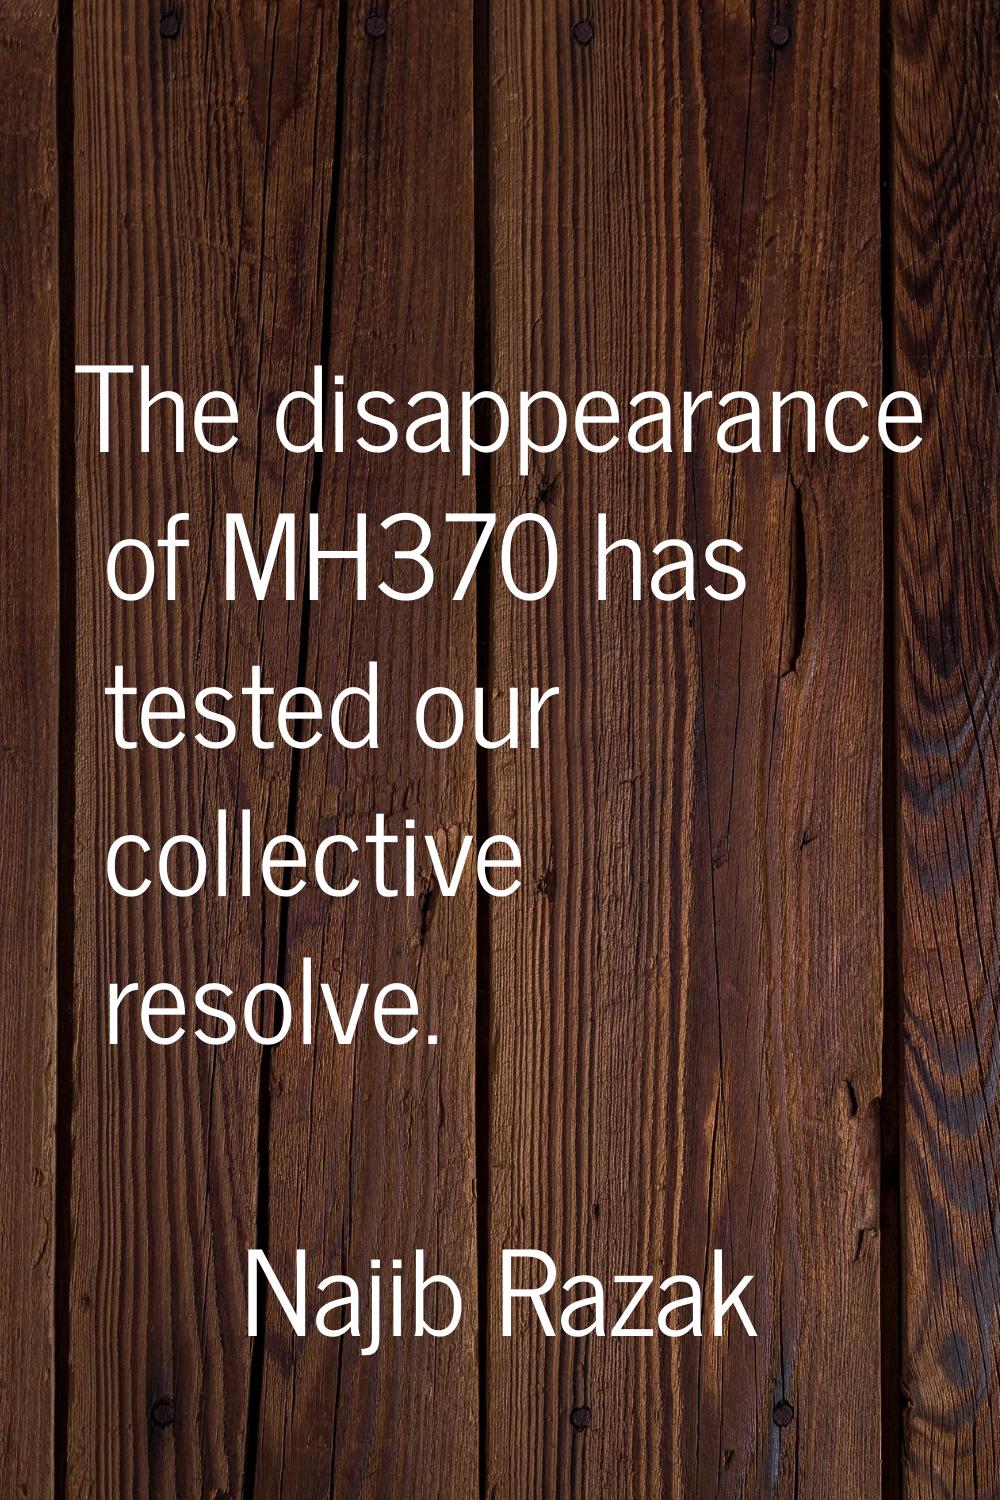 The disappearance of MH370 has tested our collective resolve.